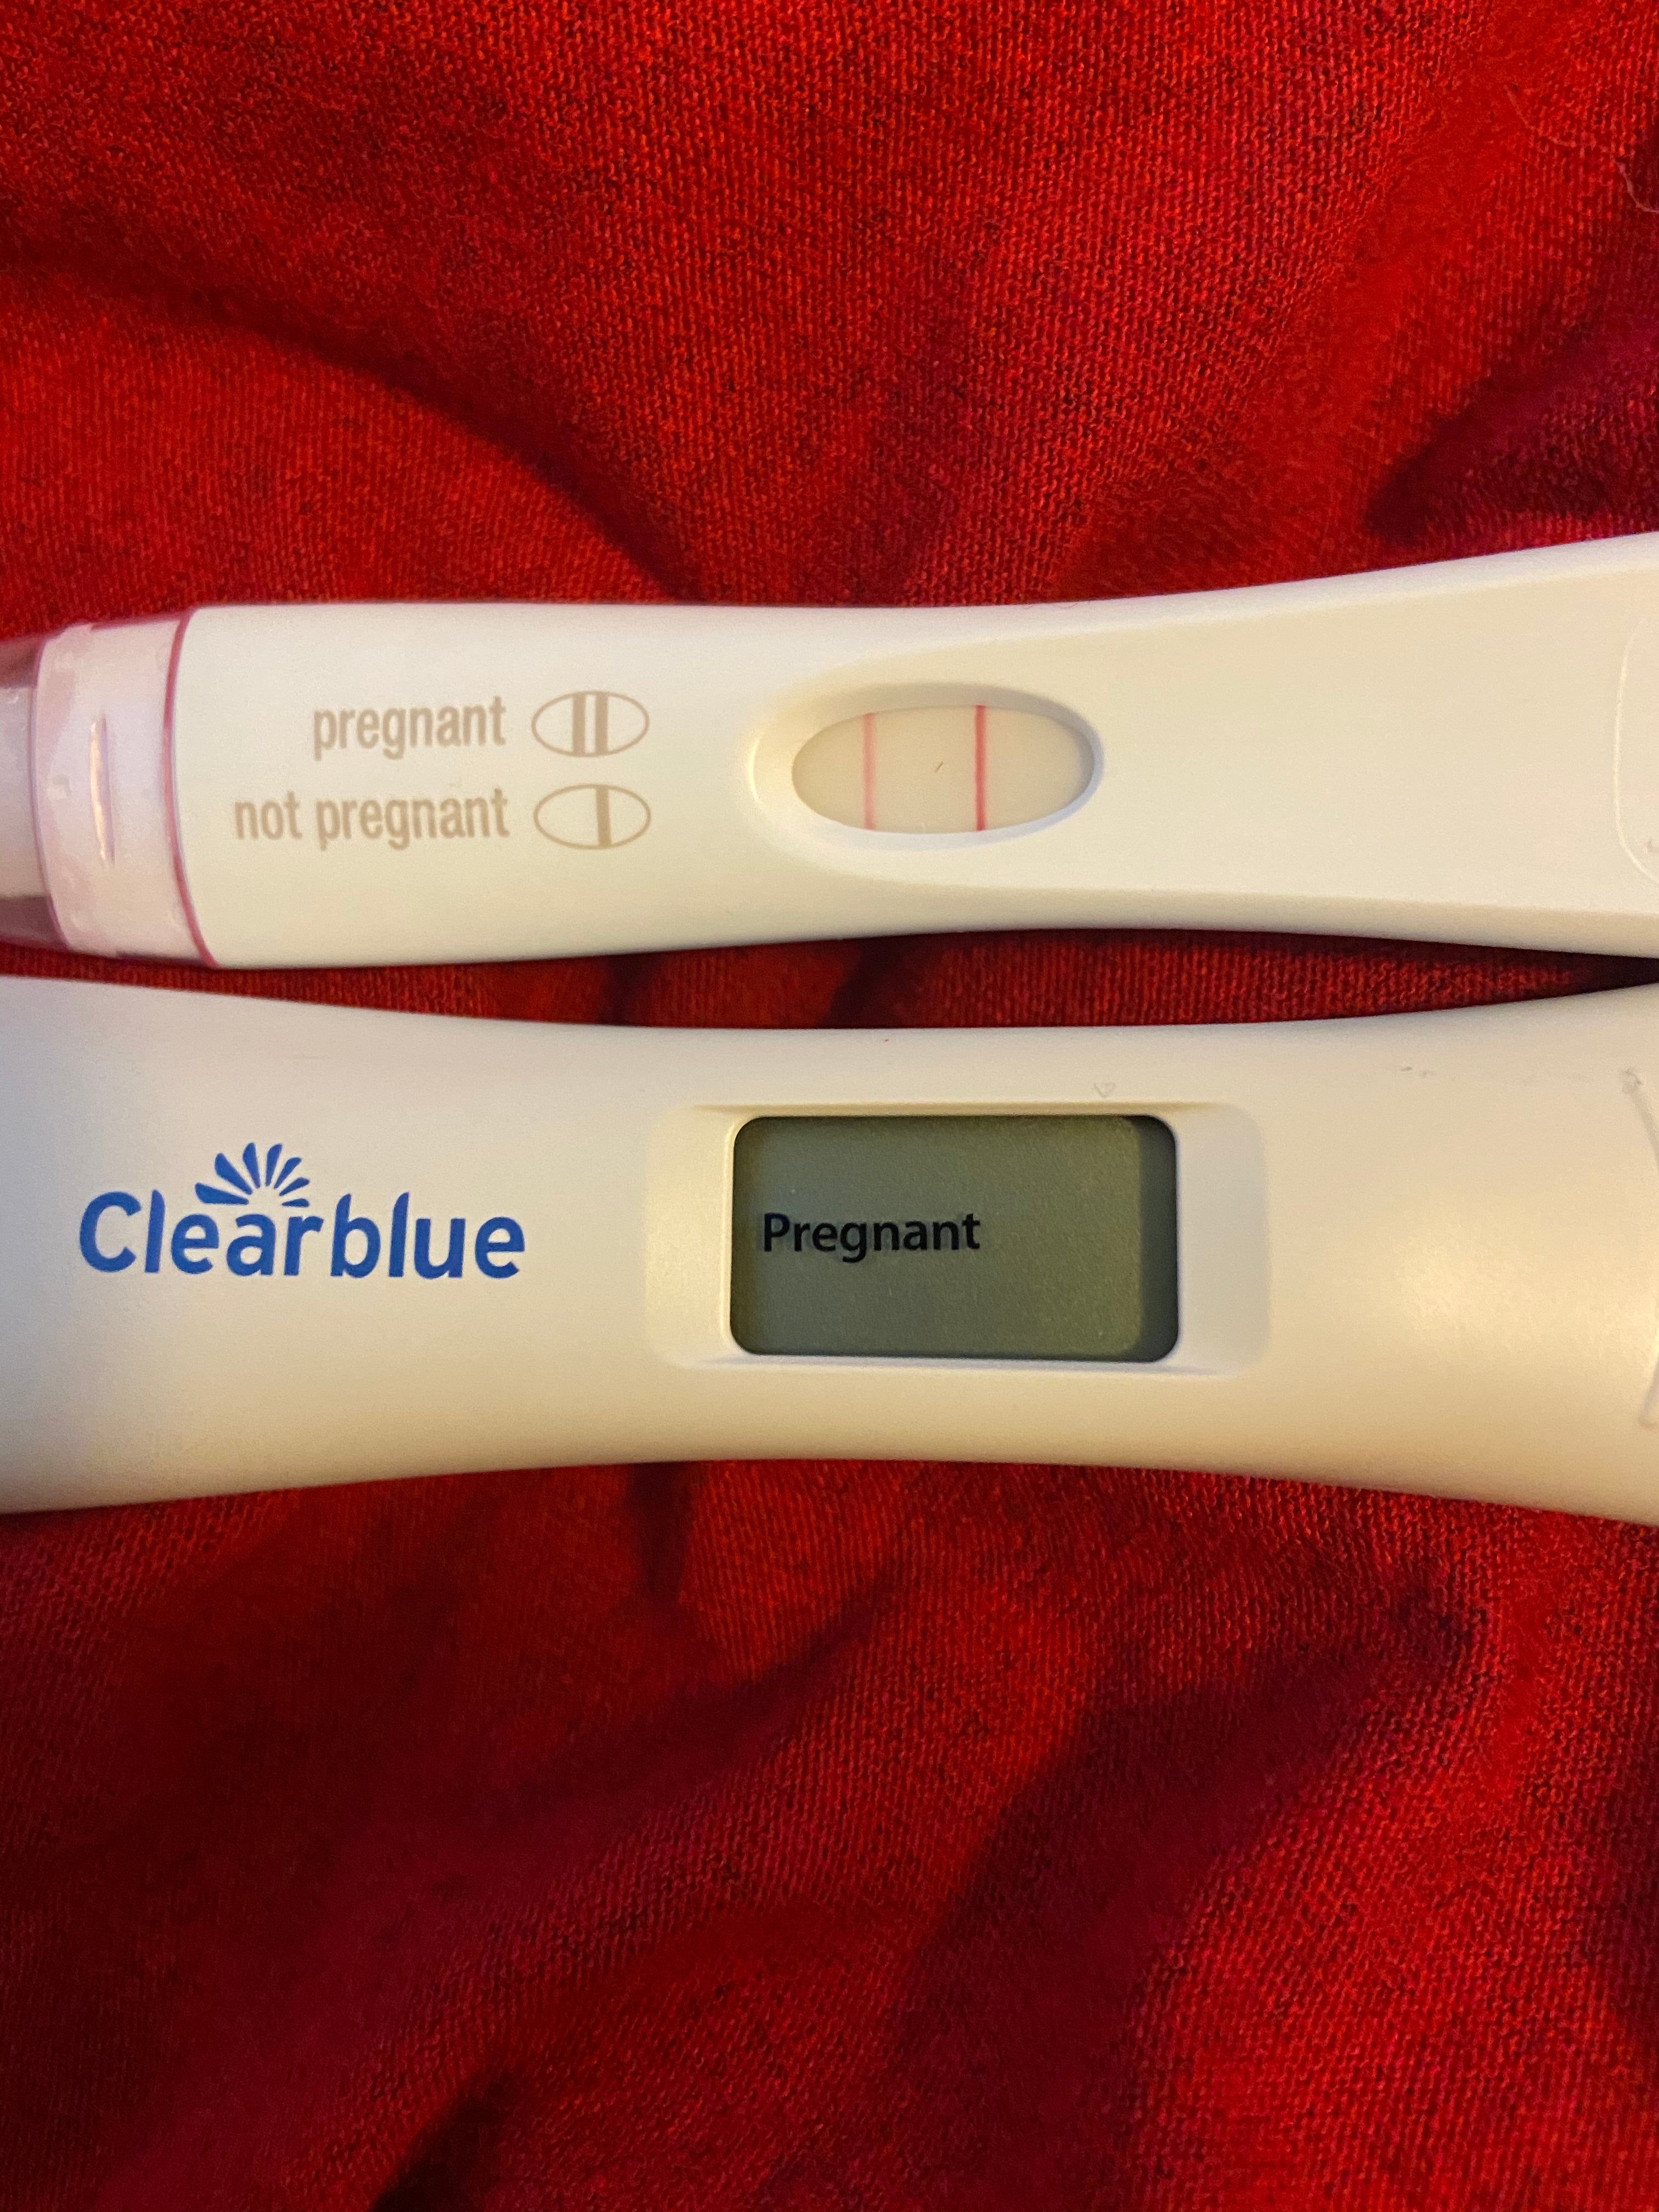 Two positive pregnancy tests on a red blanket.